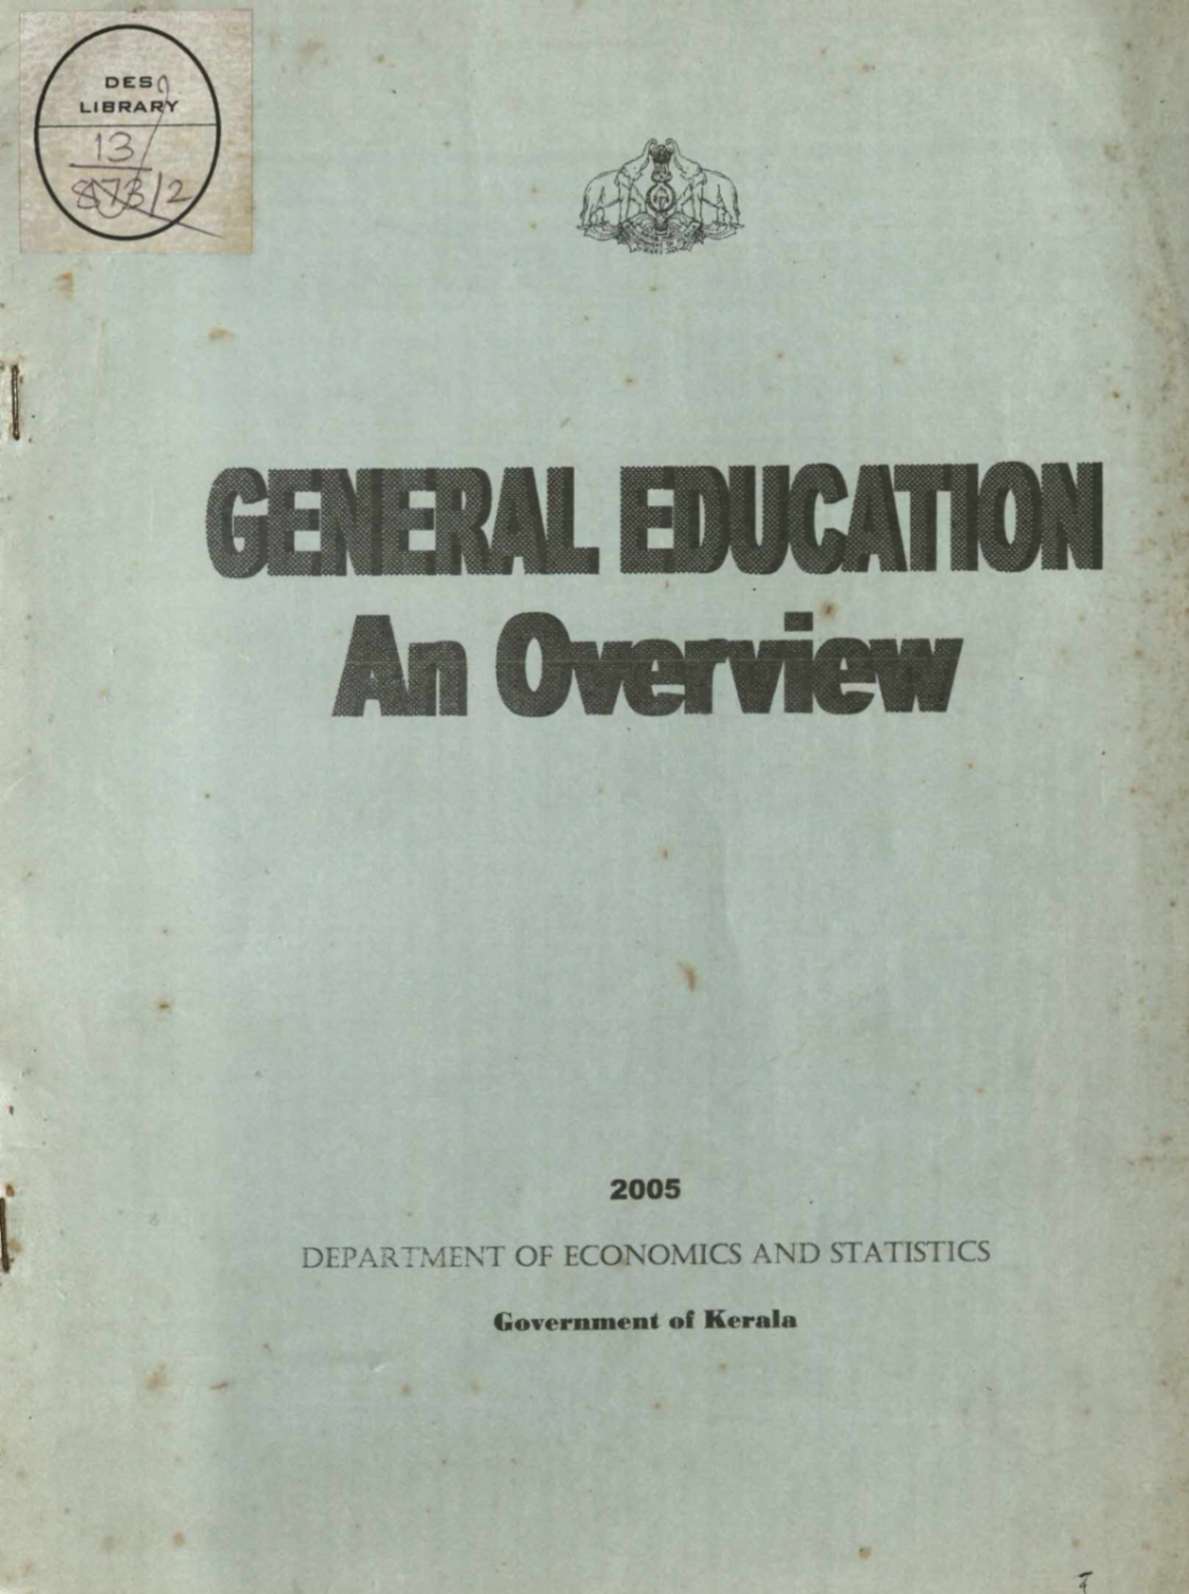 General Education An Overview